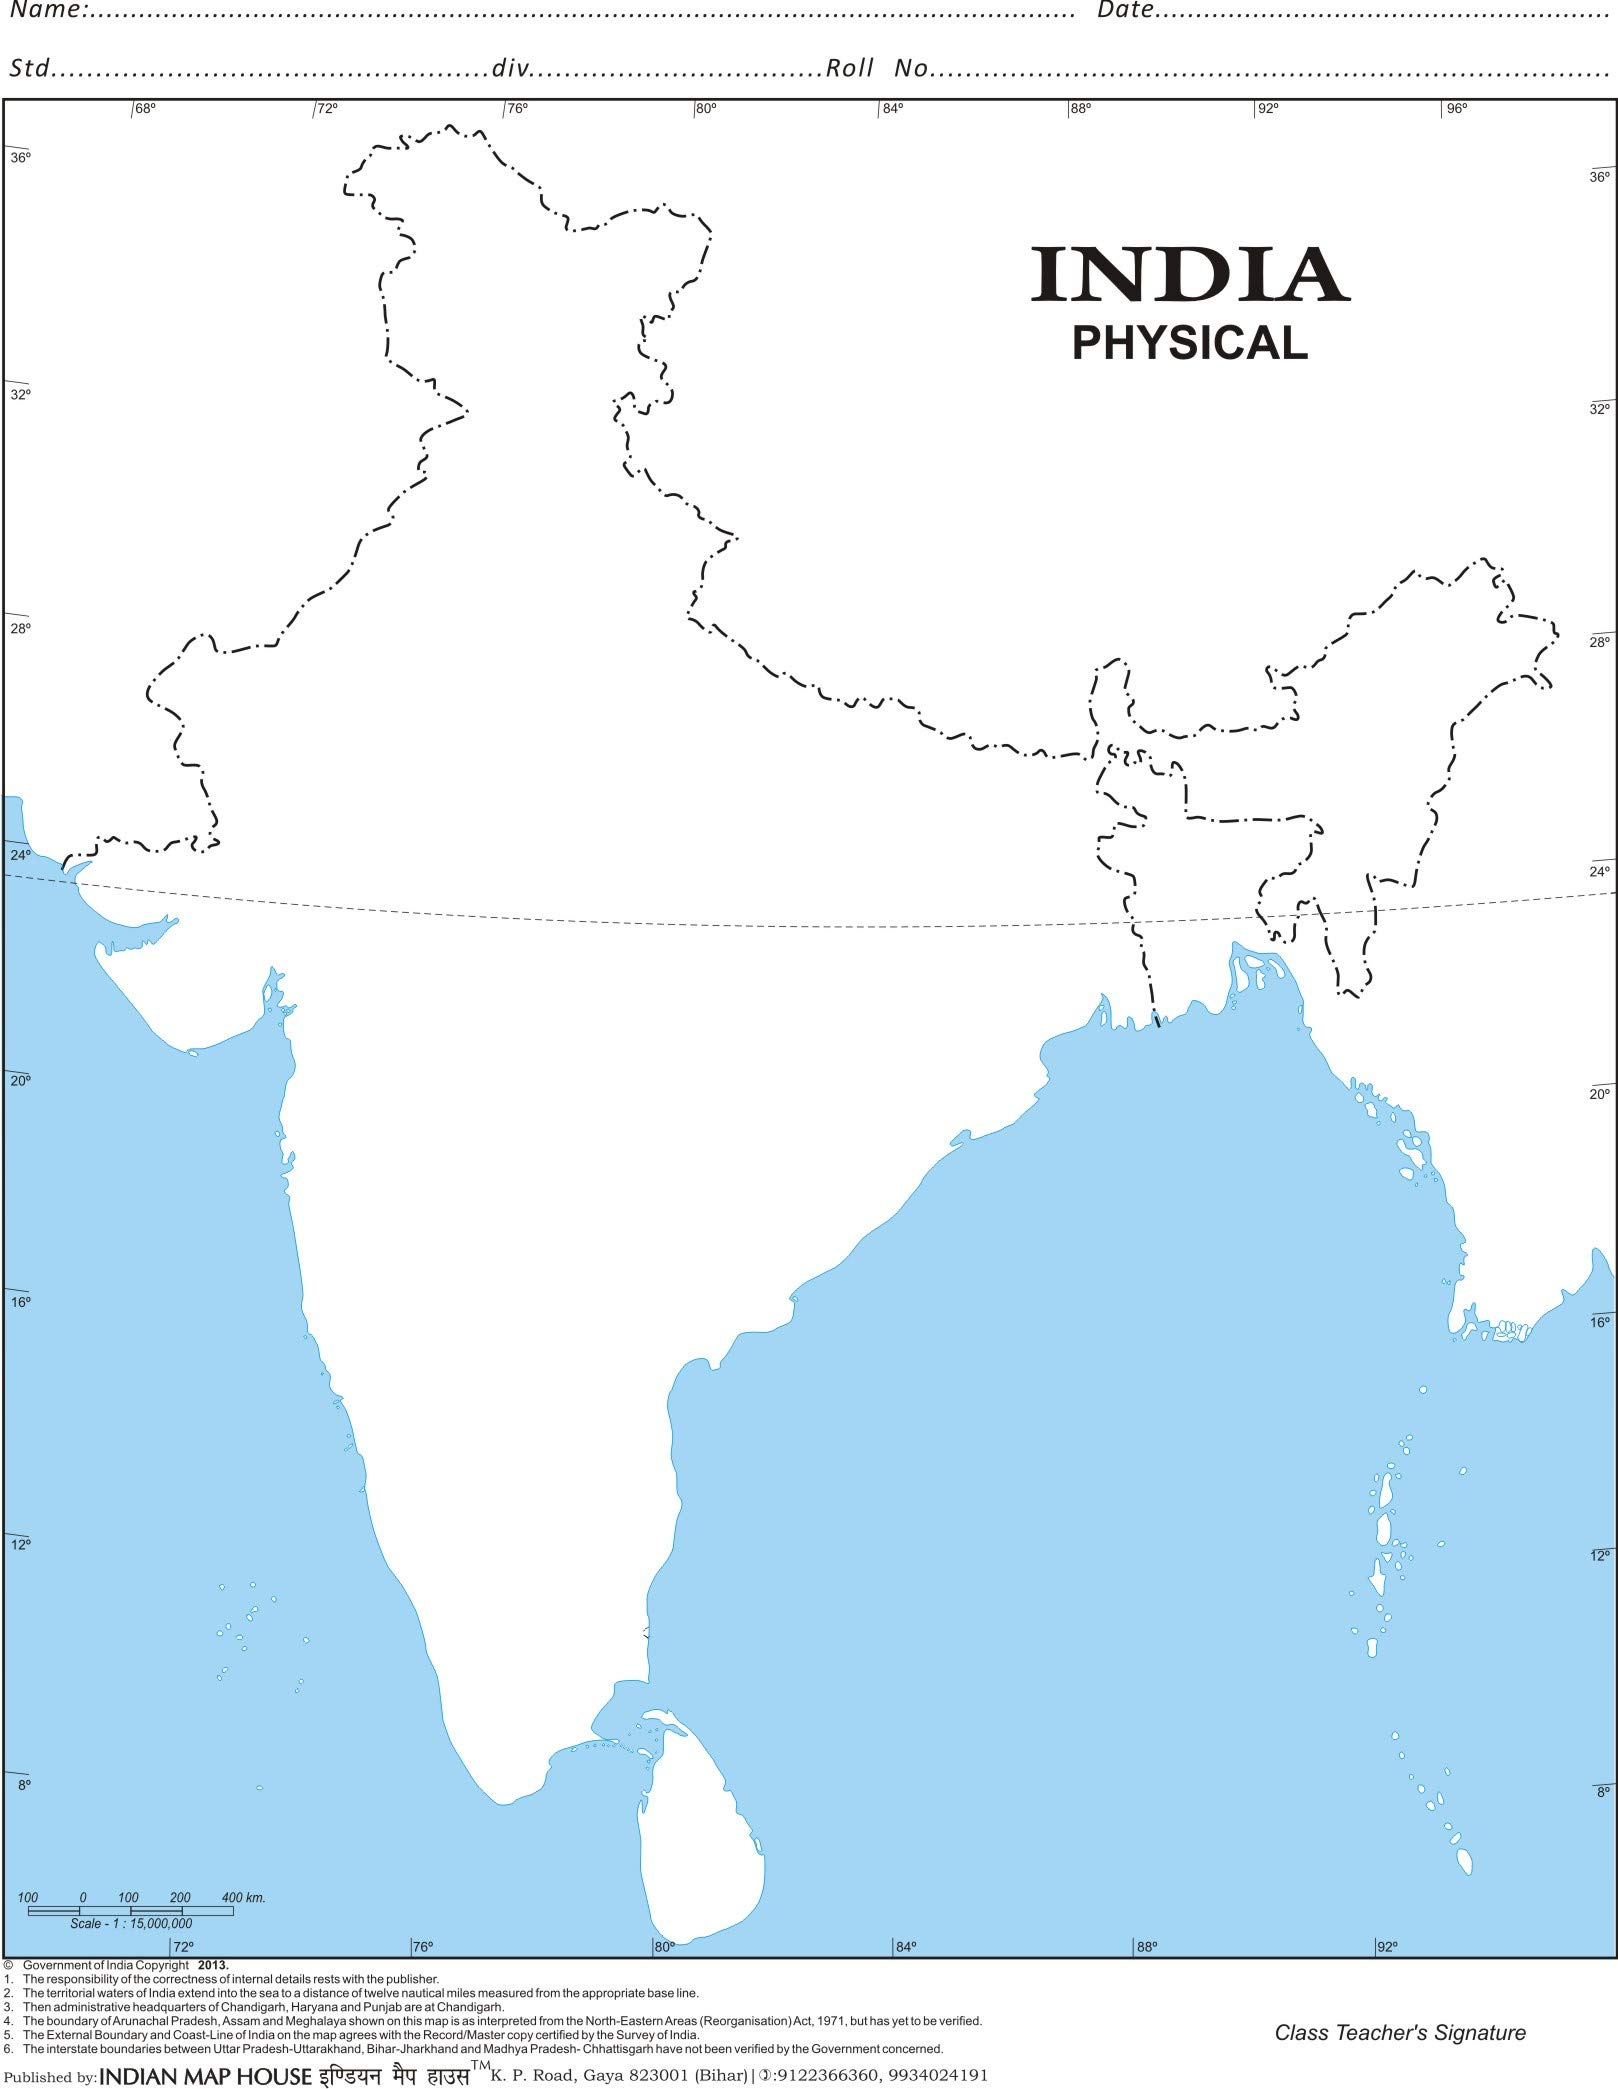 Physical Map Of India With Key